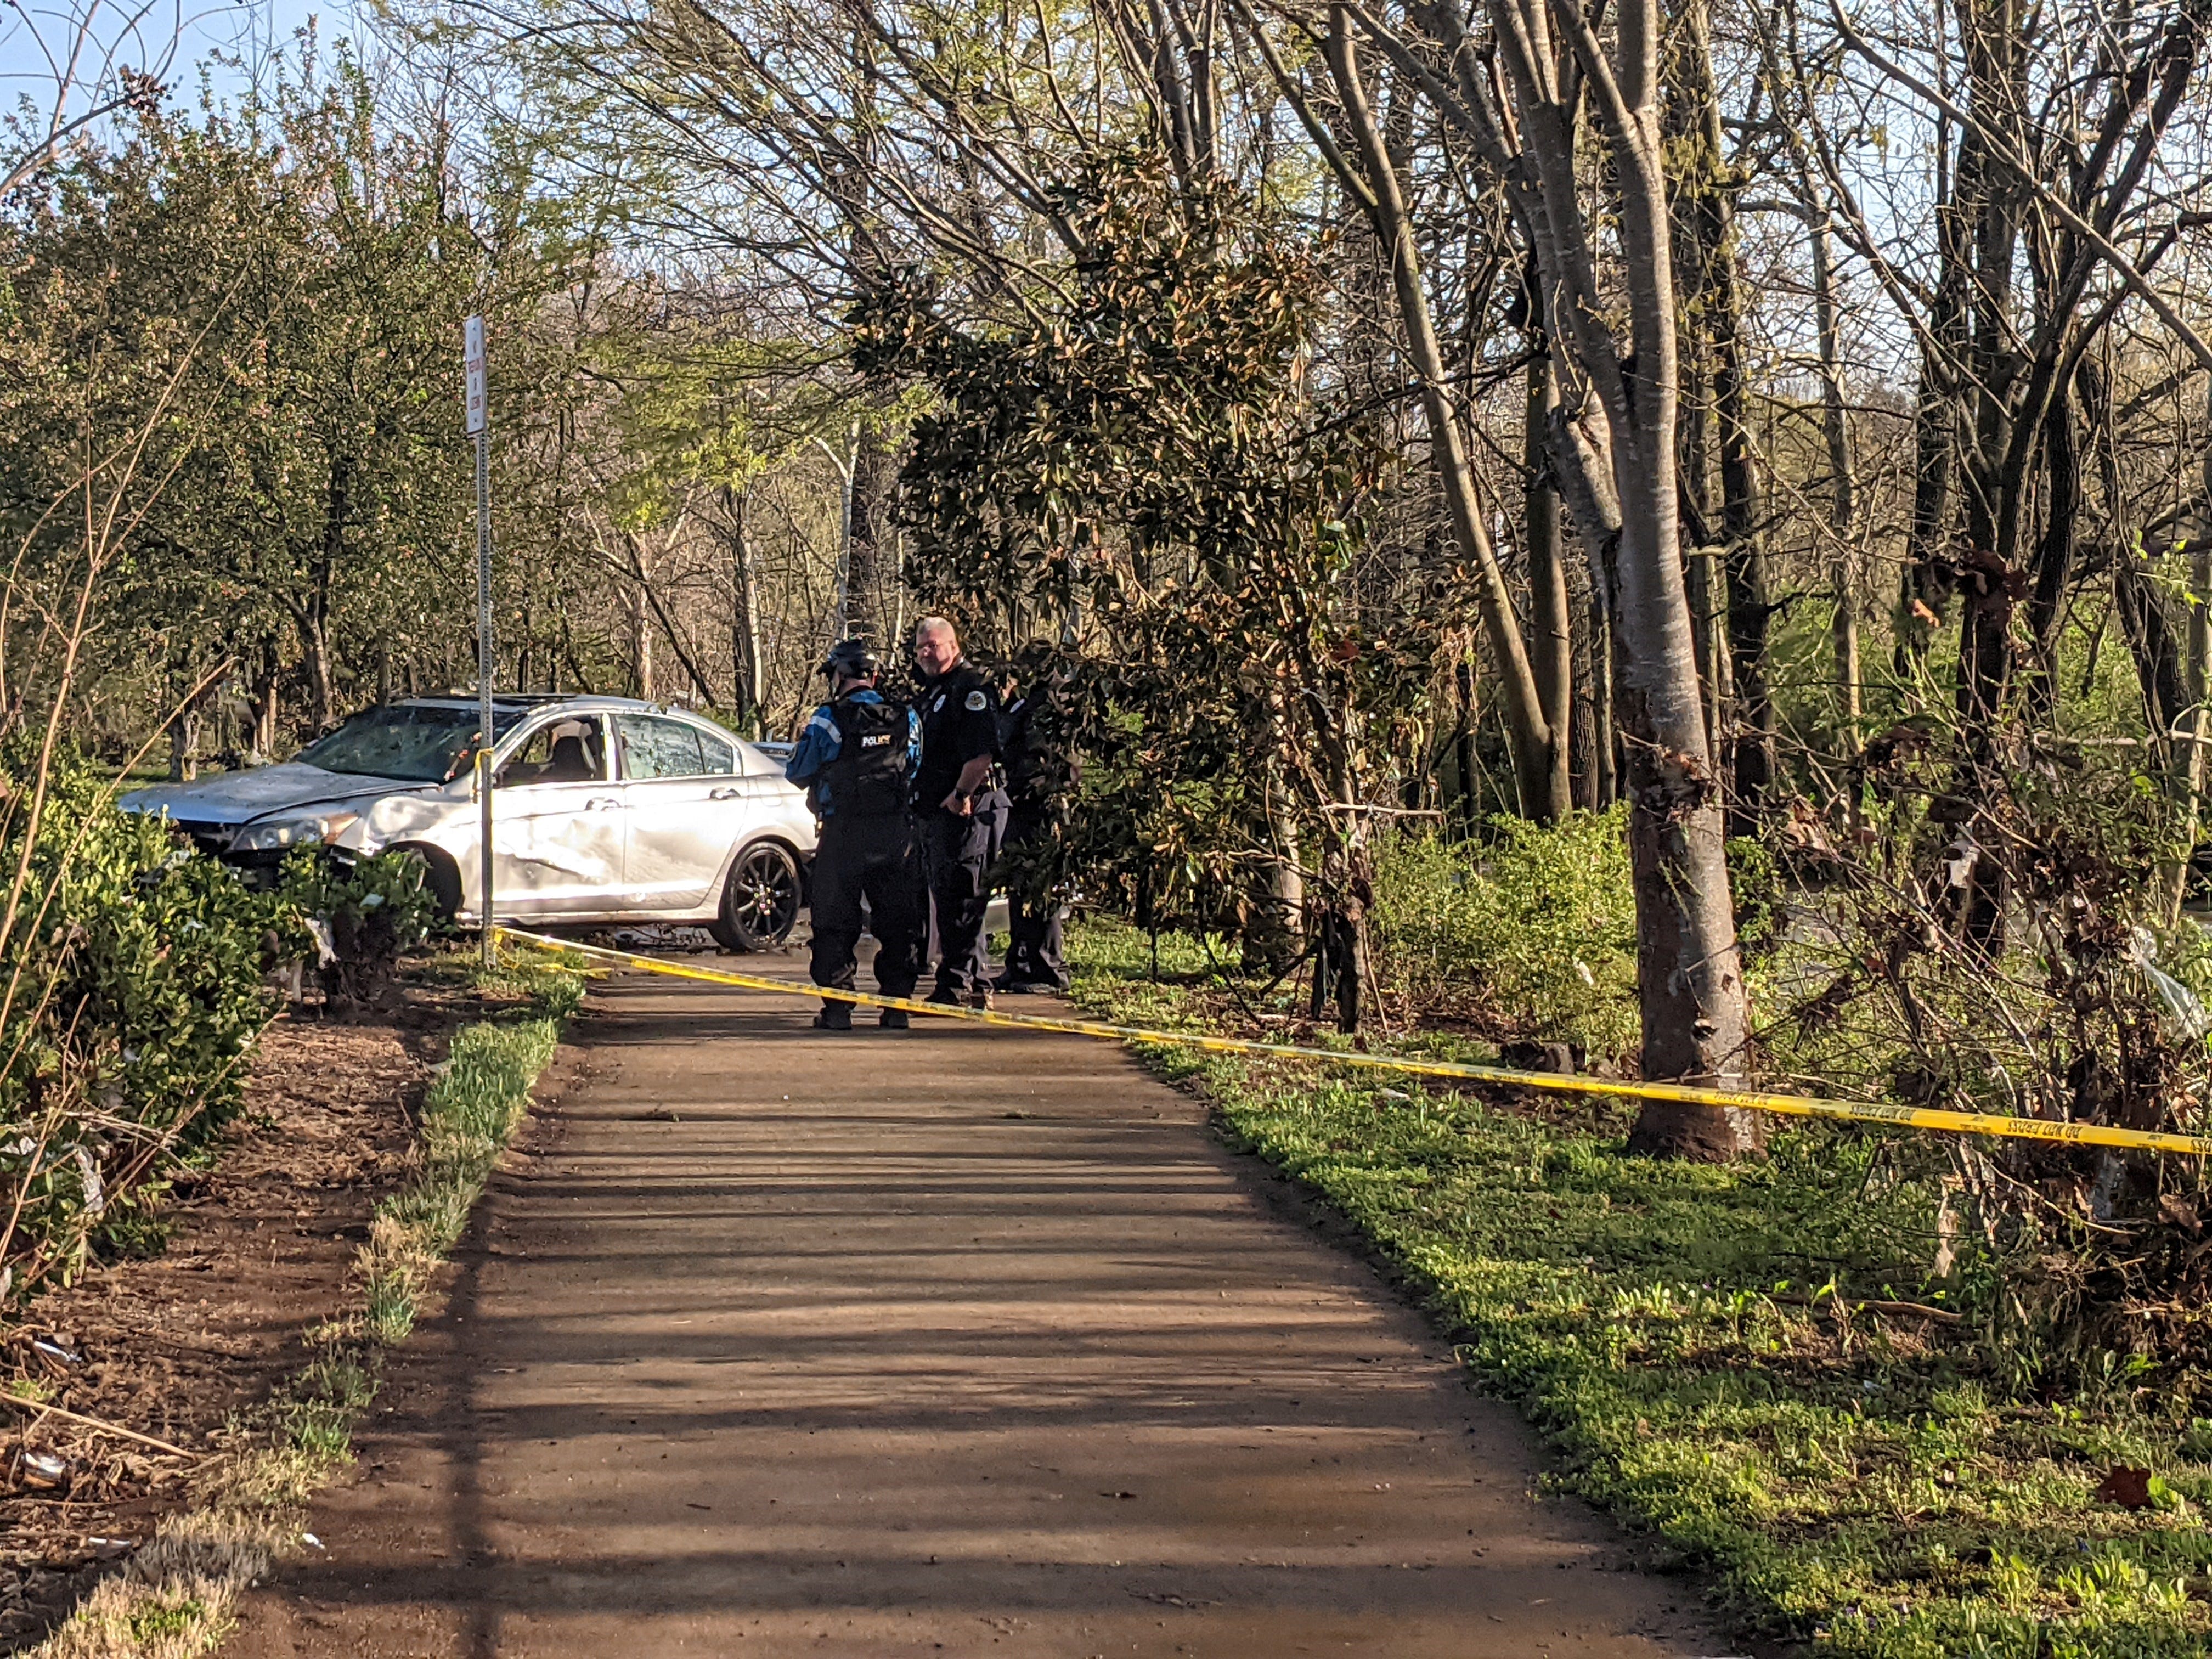 A body was recovered from a vehicle near Seven Mile Creek in Nashville, according to Metro Police.